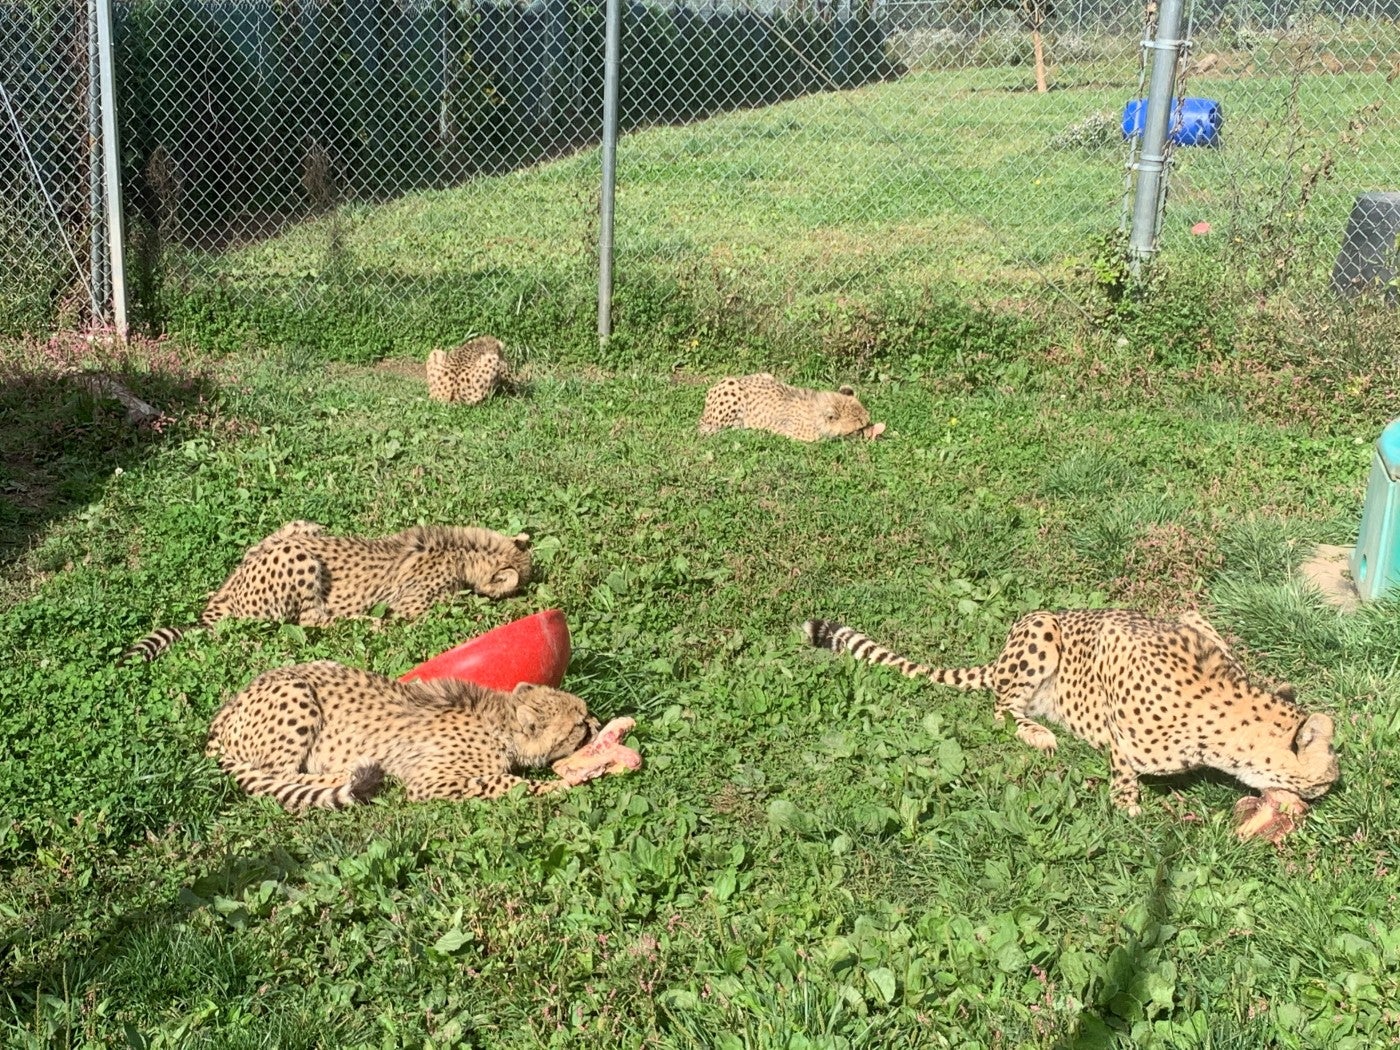 Cheetah, Echo and her four cubs enjoy horse knuckle bones in their yard.